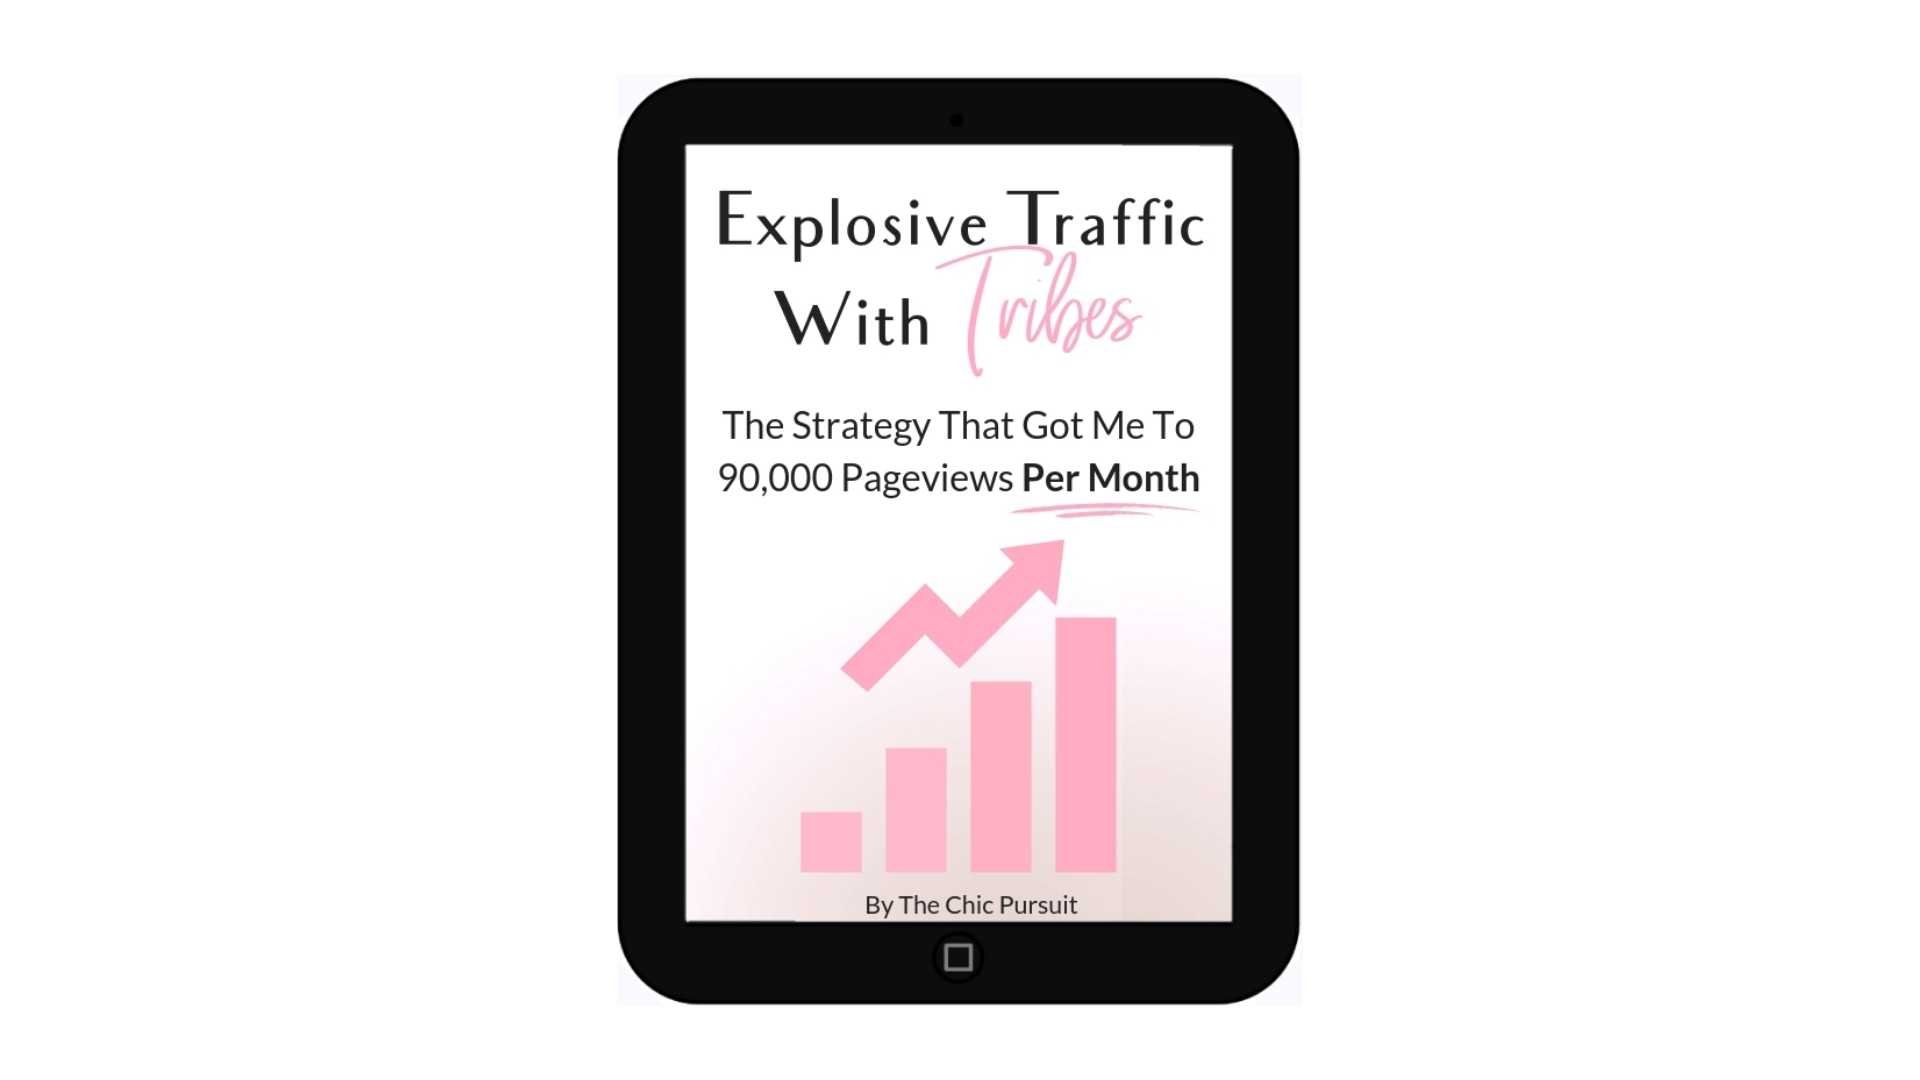 Explosive Traffic with Tribes by the chic pursuit